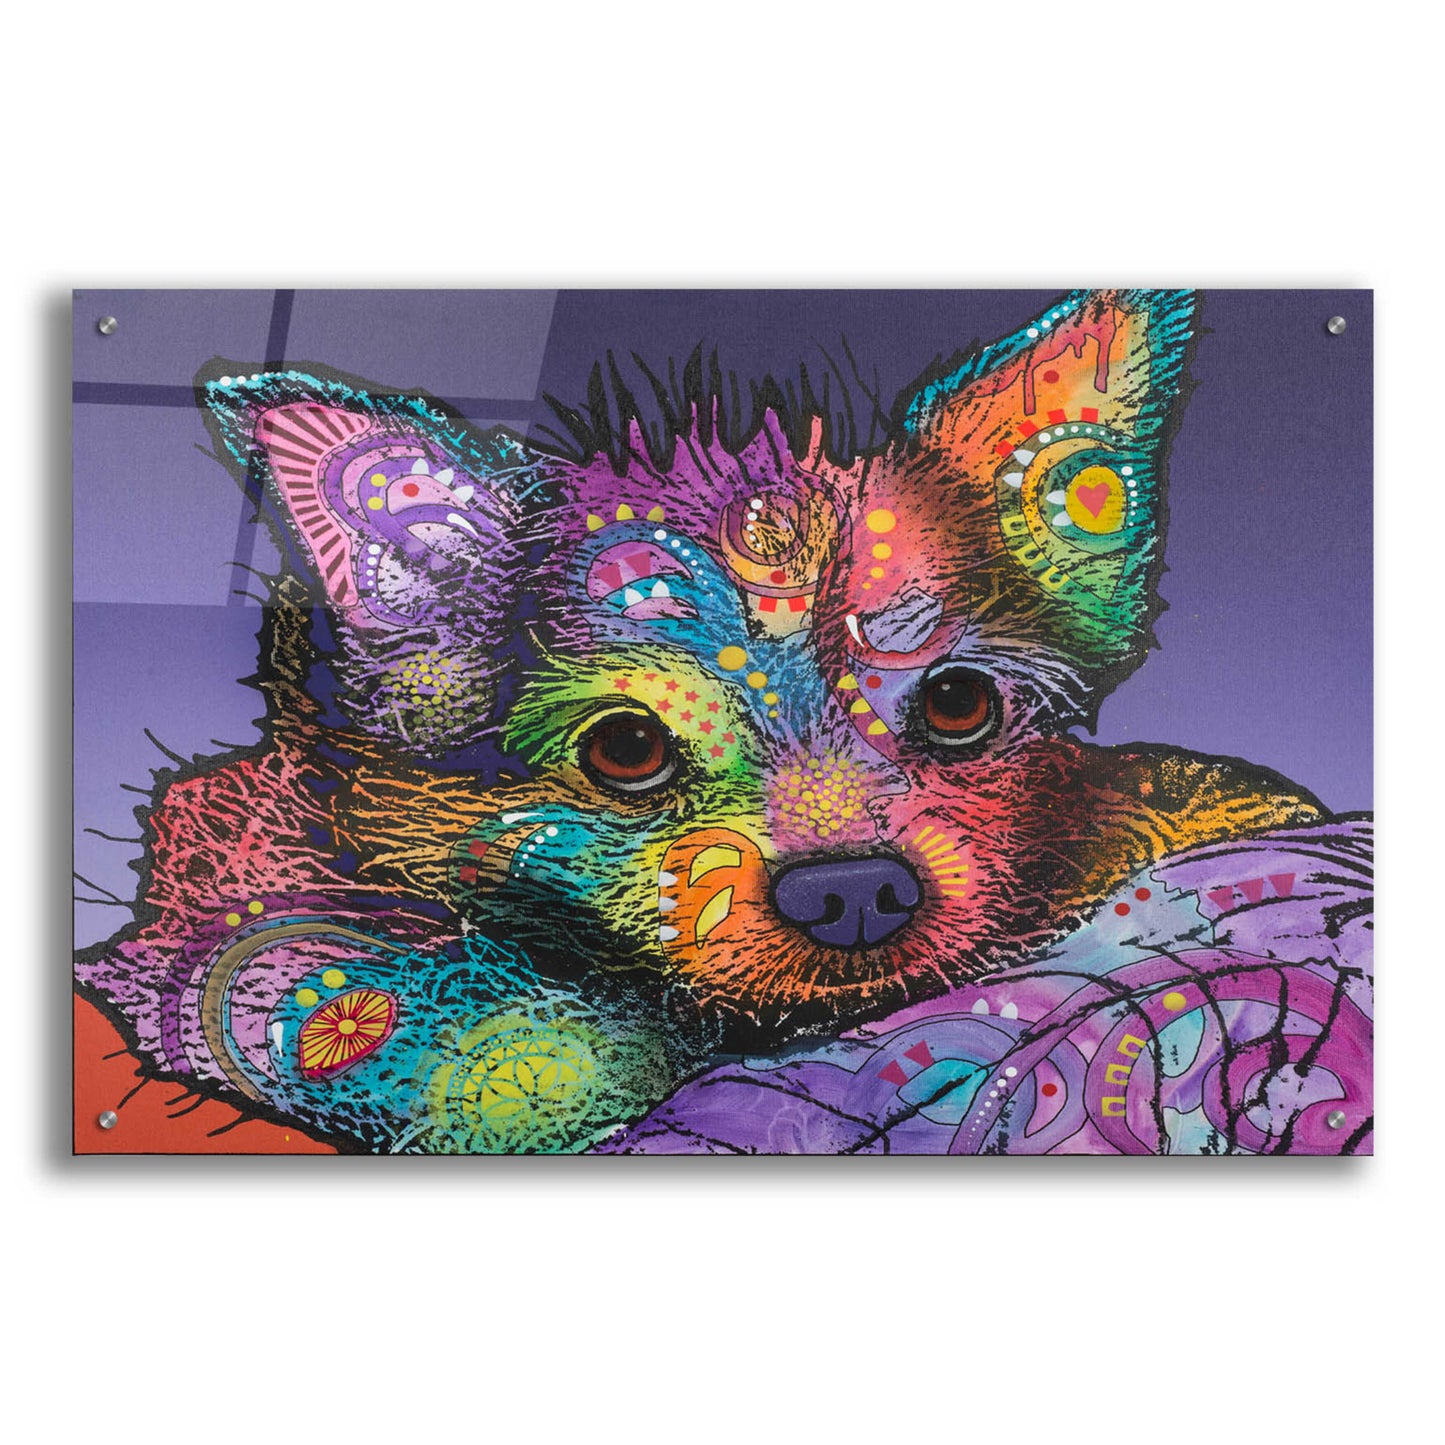 Epic Art 'Romeo' by Dean Russo, Acrylic Glass Wall Art,36x24